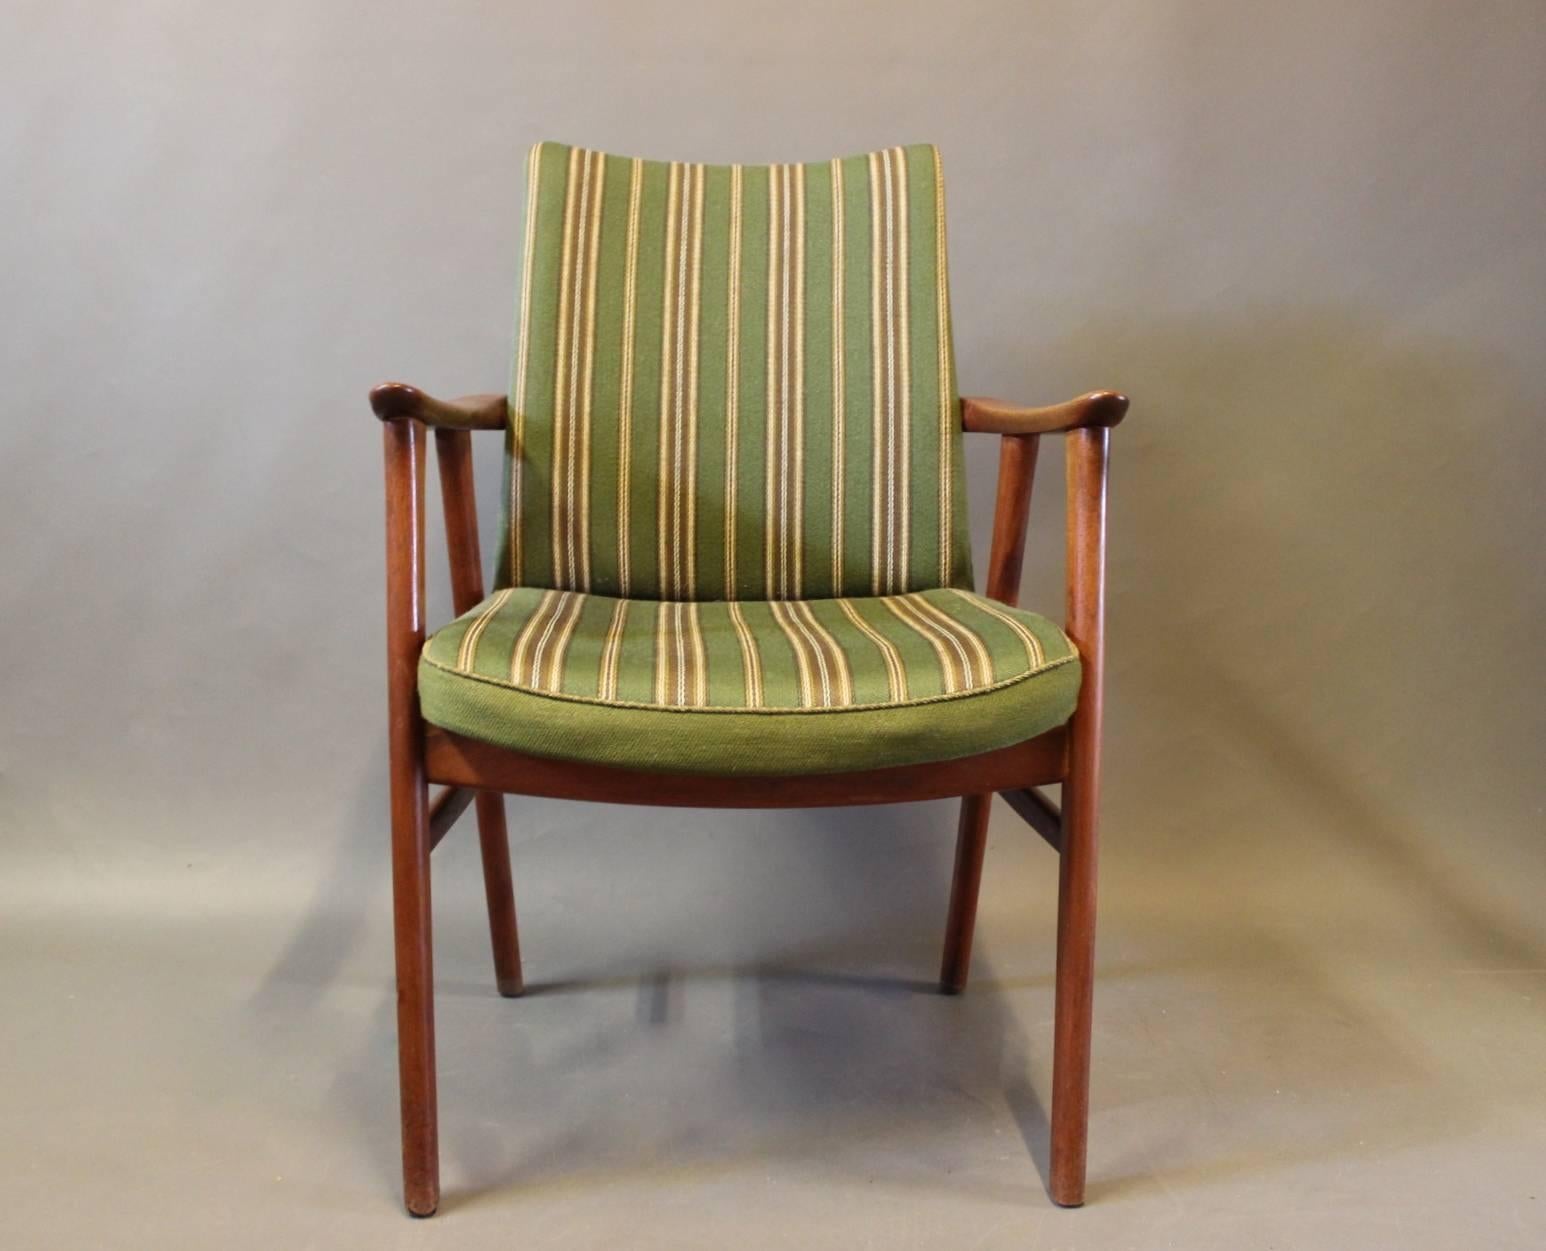 Armchair in teak and upholstered in green fabric of Danish design from the 1960s. The chair is in great vintage condition.